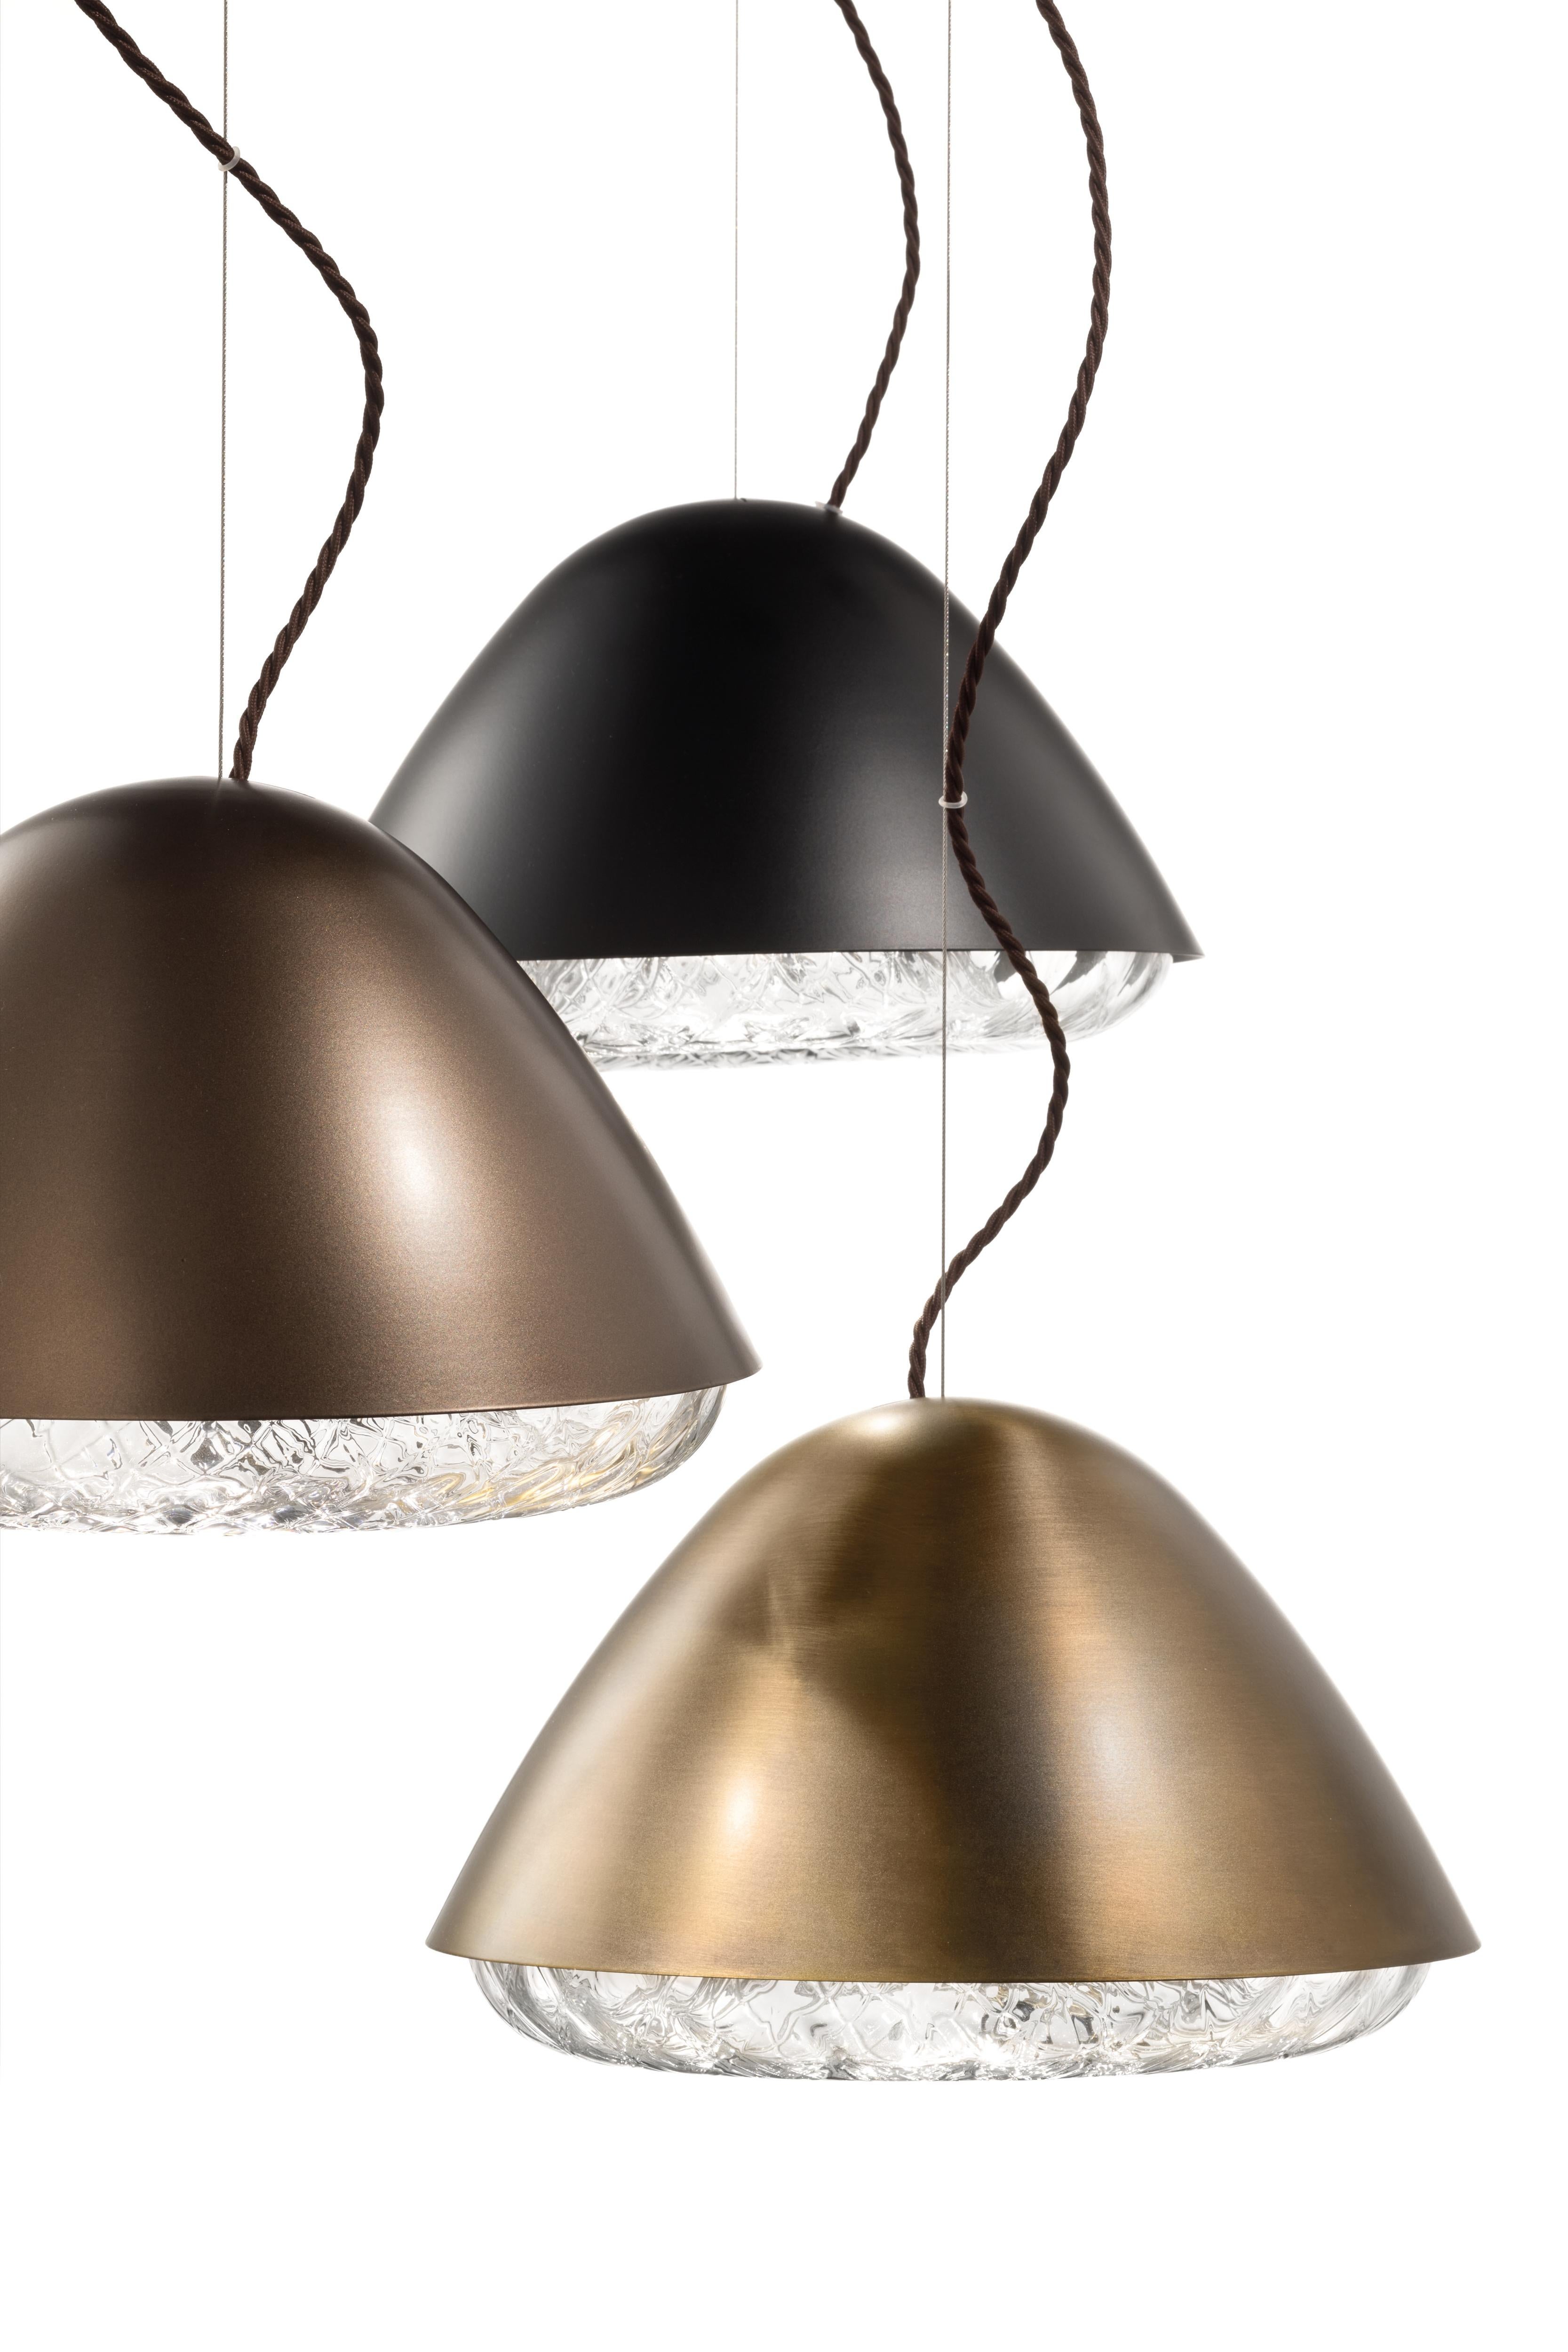 Kira is a collection of lamps combining metal with blown glass. The result is a set of lighting systems composed of two antithetical halves: a diffuser in crystal glass, decorated and embellished with a rich surface texture, topped with a turned